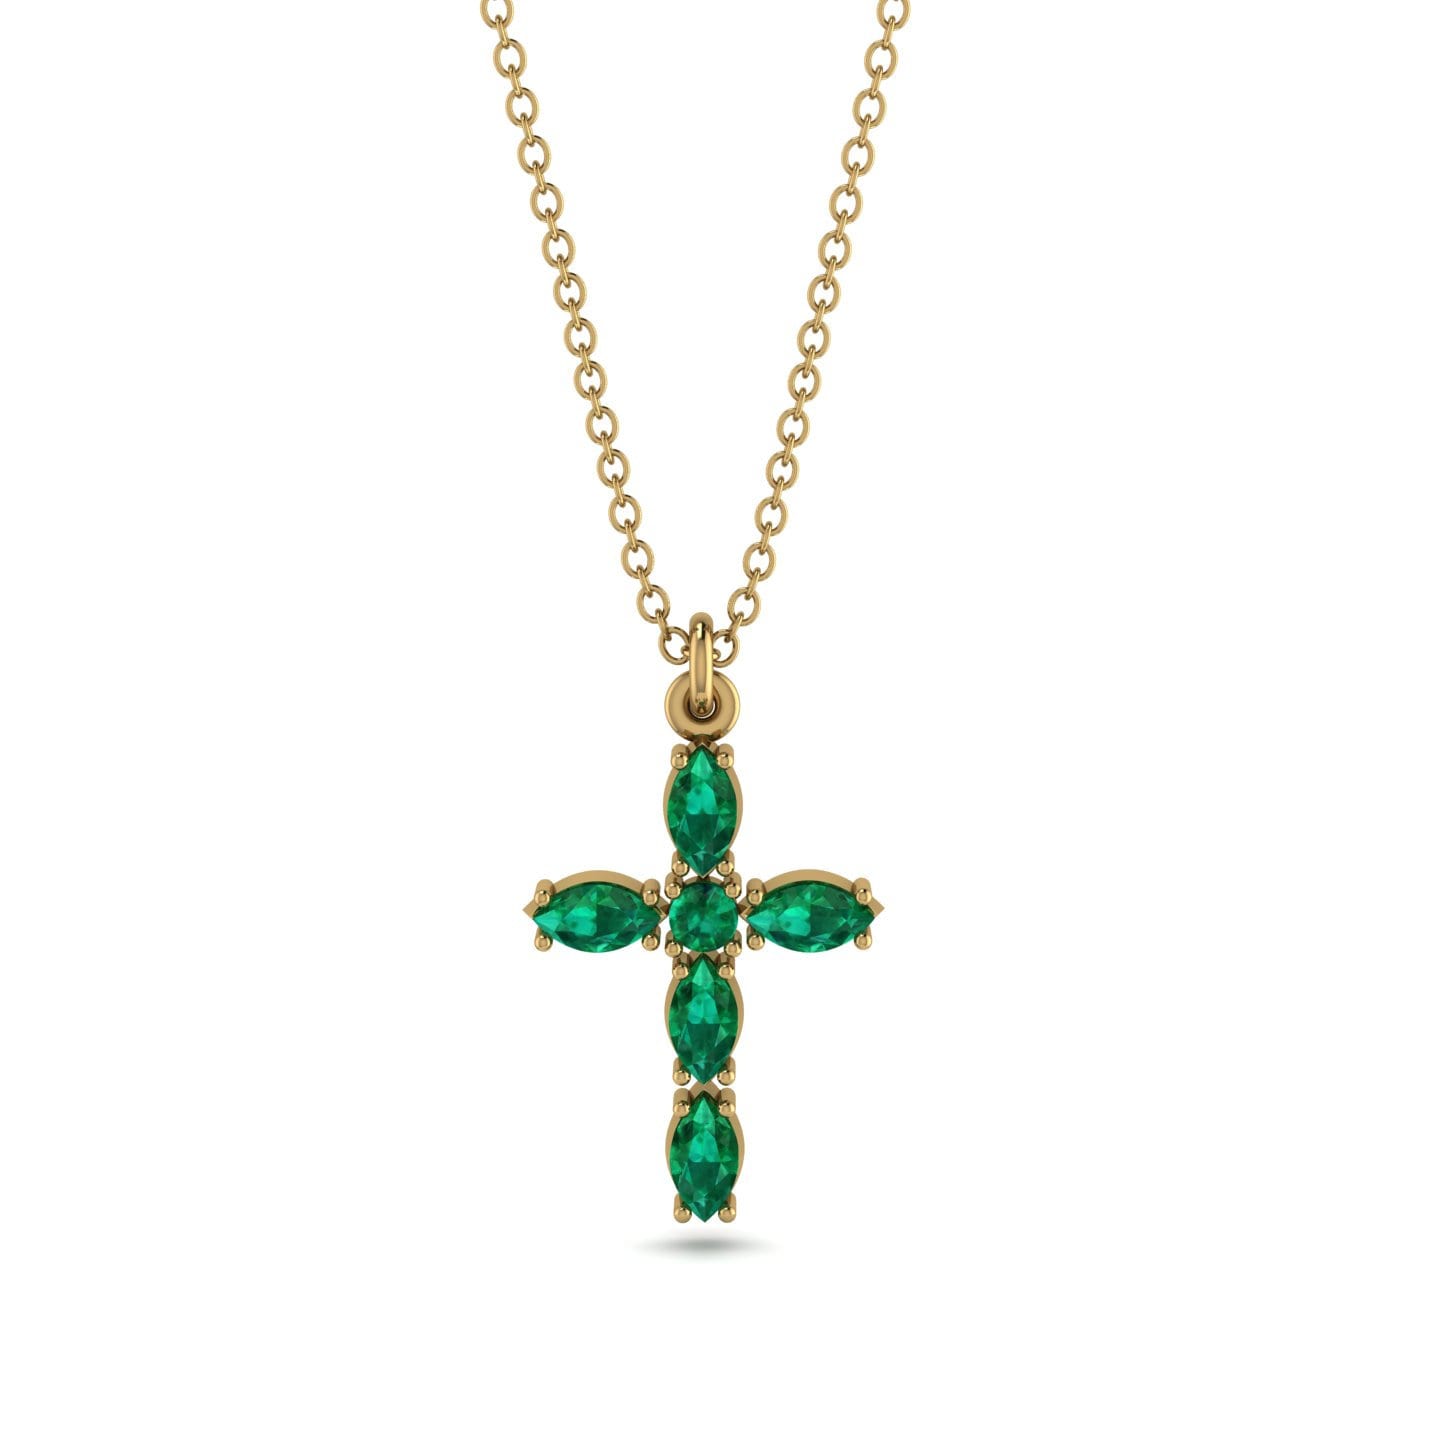 Gold Cross With Emeralds | canoeracing.org.uk